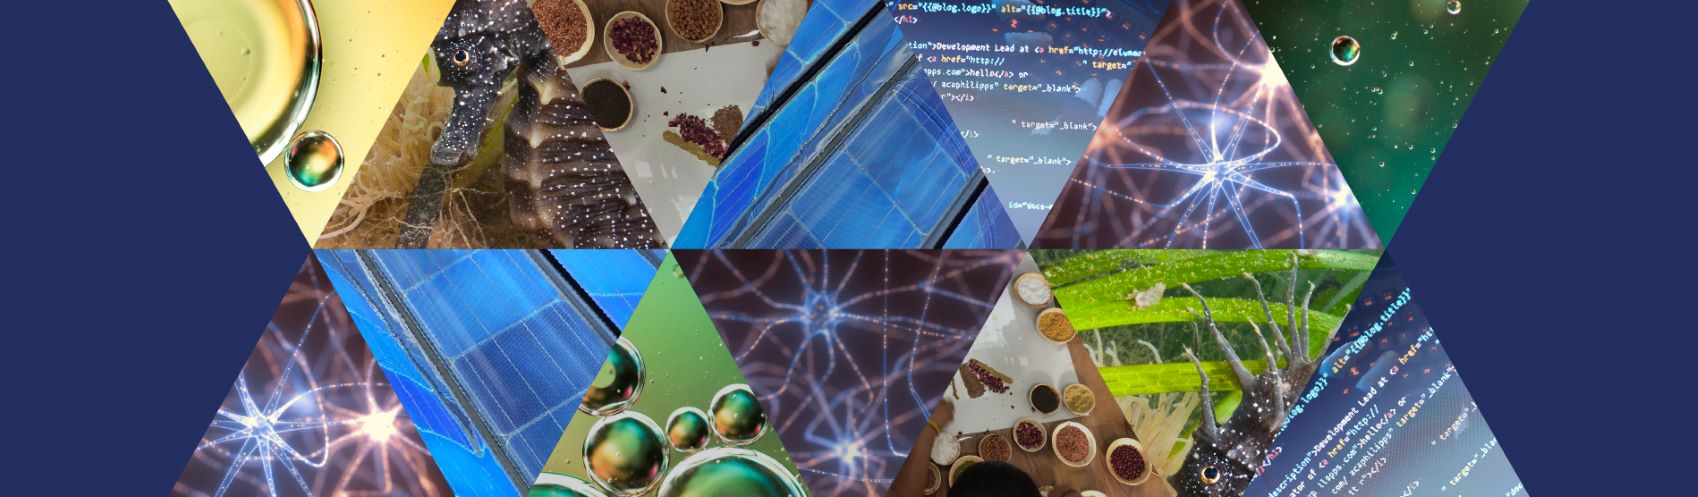 Triangles containing imagery of: oil on water, coding on screen, solar cells, people sitting with coloured spices, and brain neurons firing